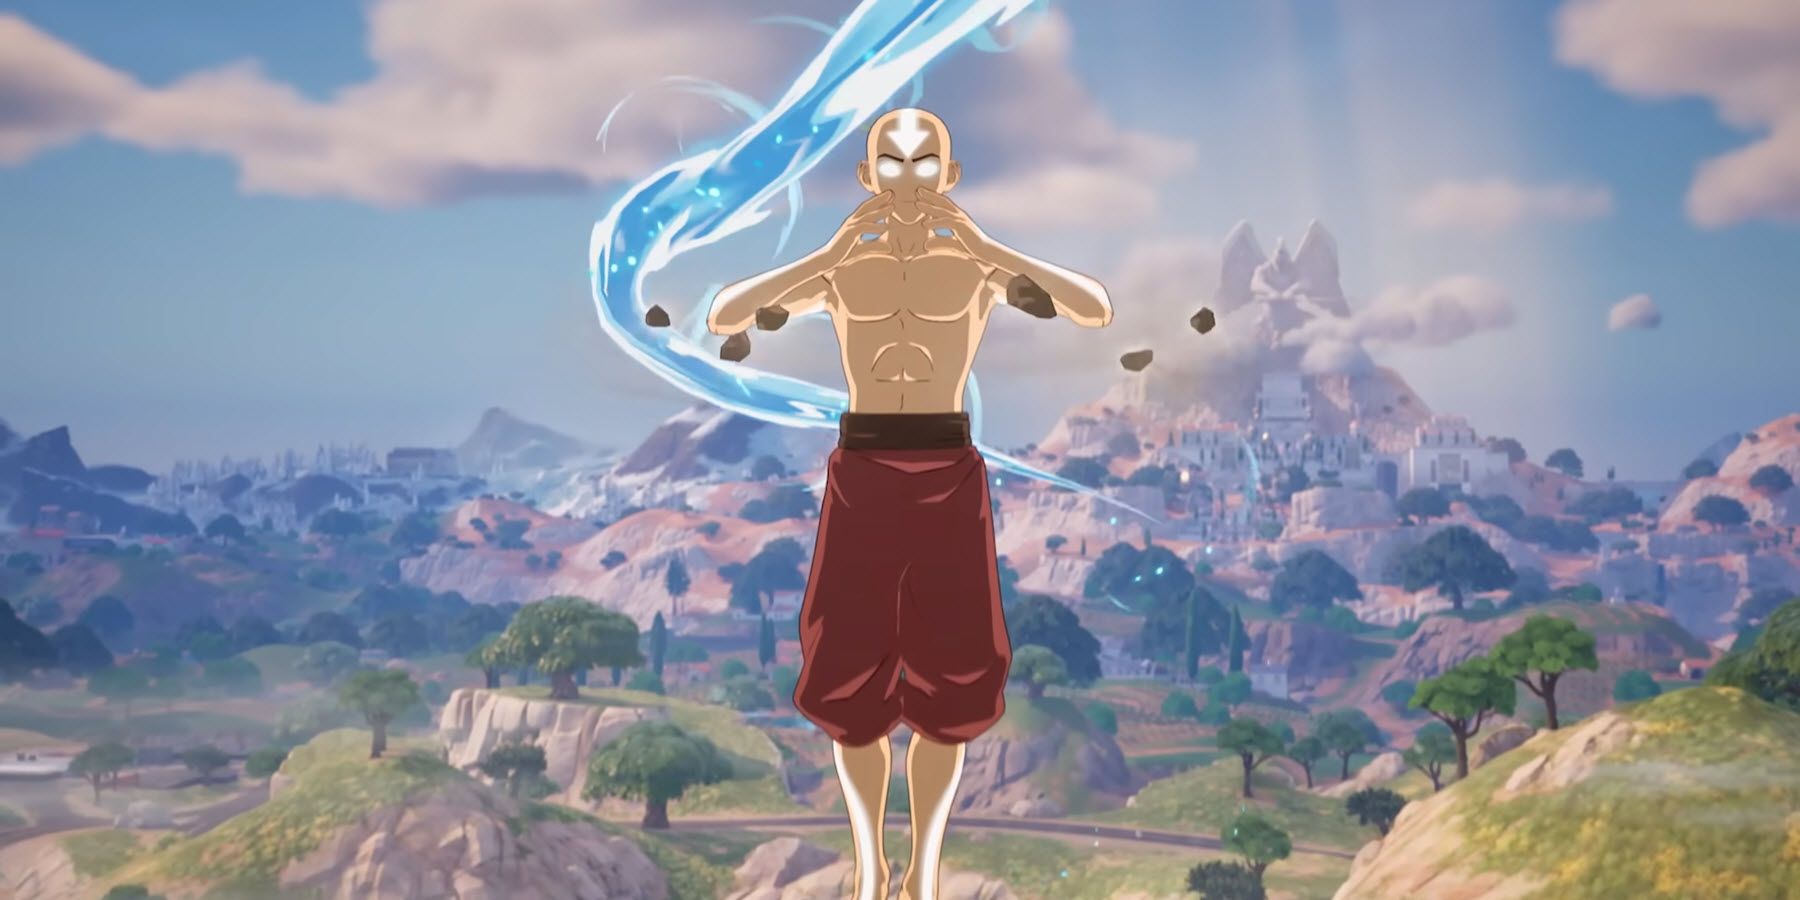 android, when does the avatar event end in fortnite?